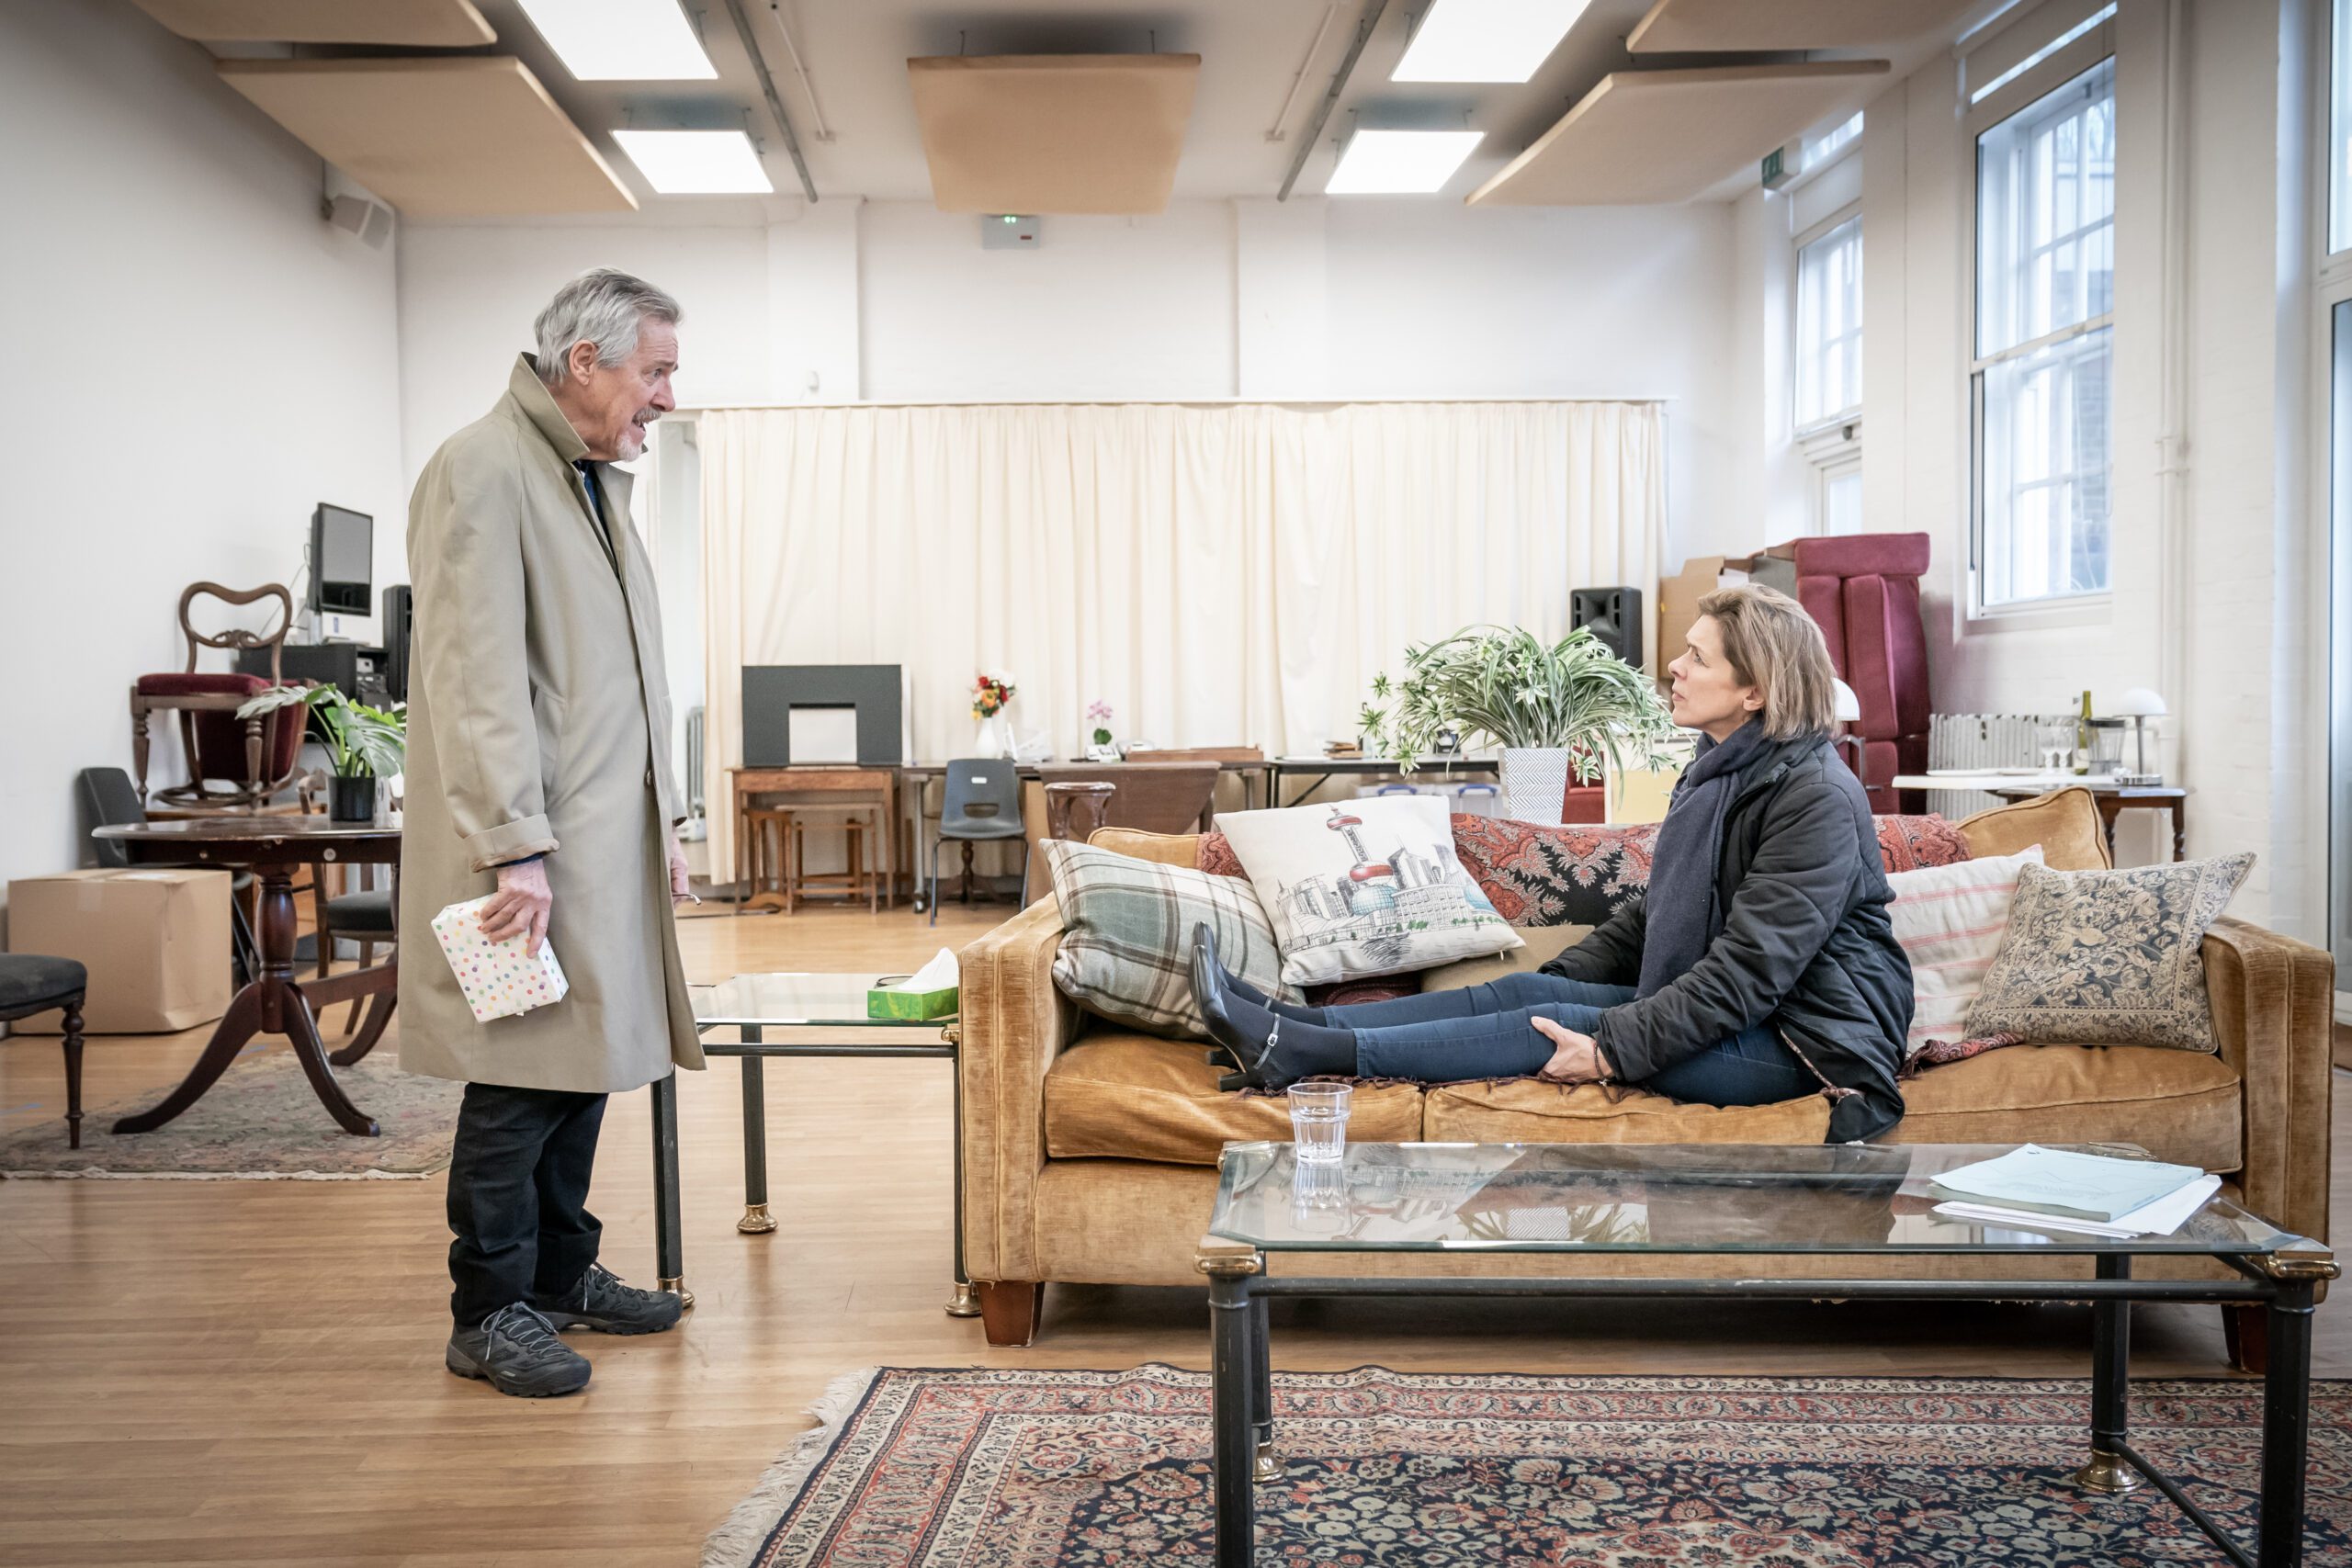 Actors Janie Dee and Griff Rhys Jones pictured in a set designed as a living room playing Laura and Peter in An Hour and a Half Late currently showing at Malvern Theatres